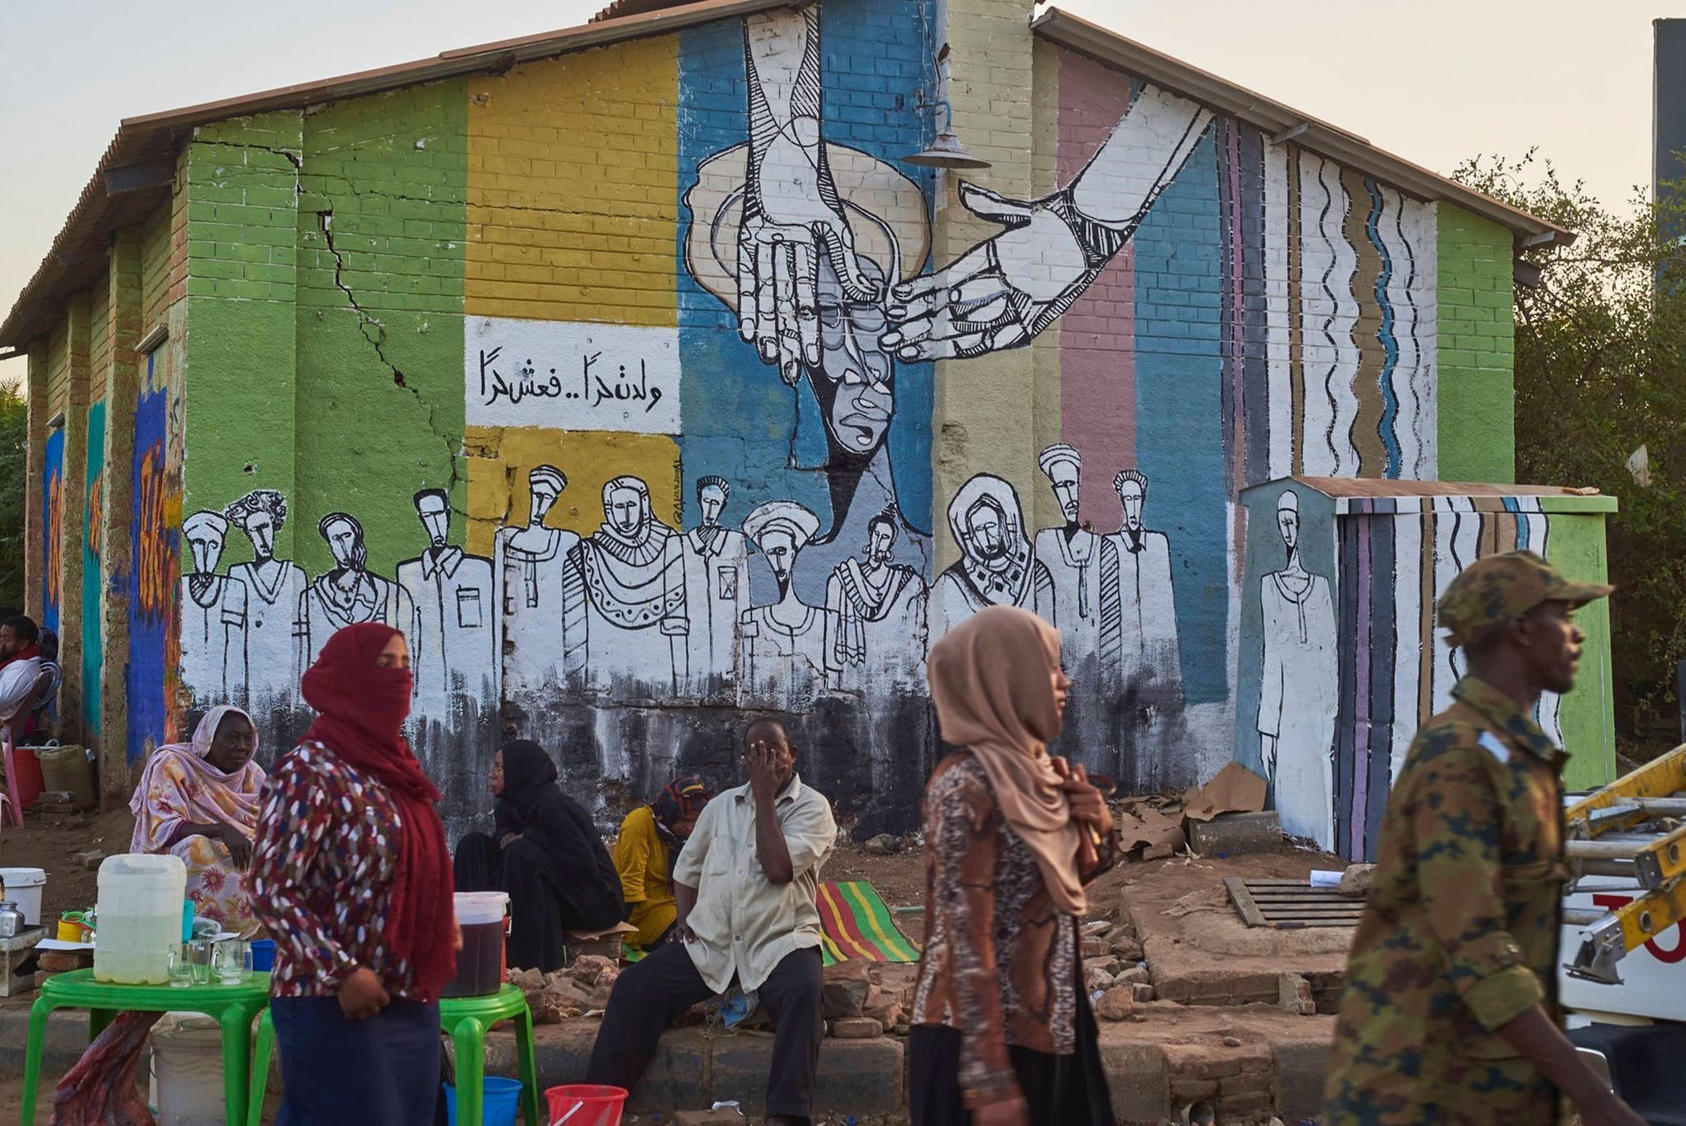 A mural by Galal Yousif near the sit-in site reads “you were born free, so live free.” (Sari Ahmed Awad)